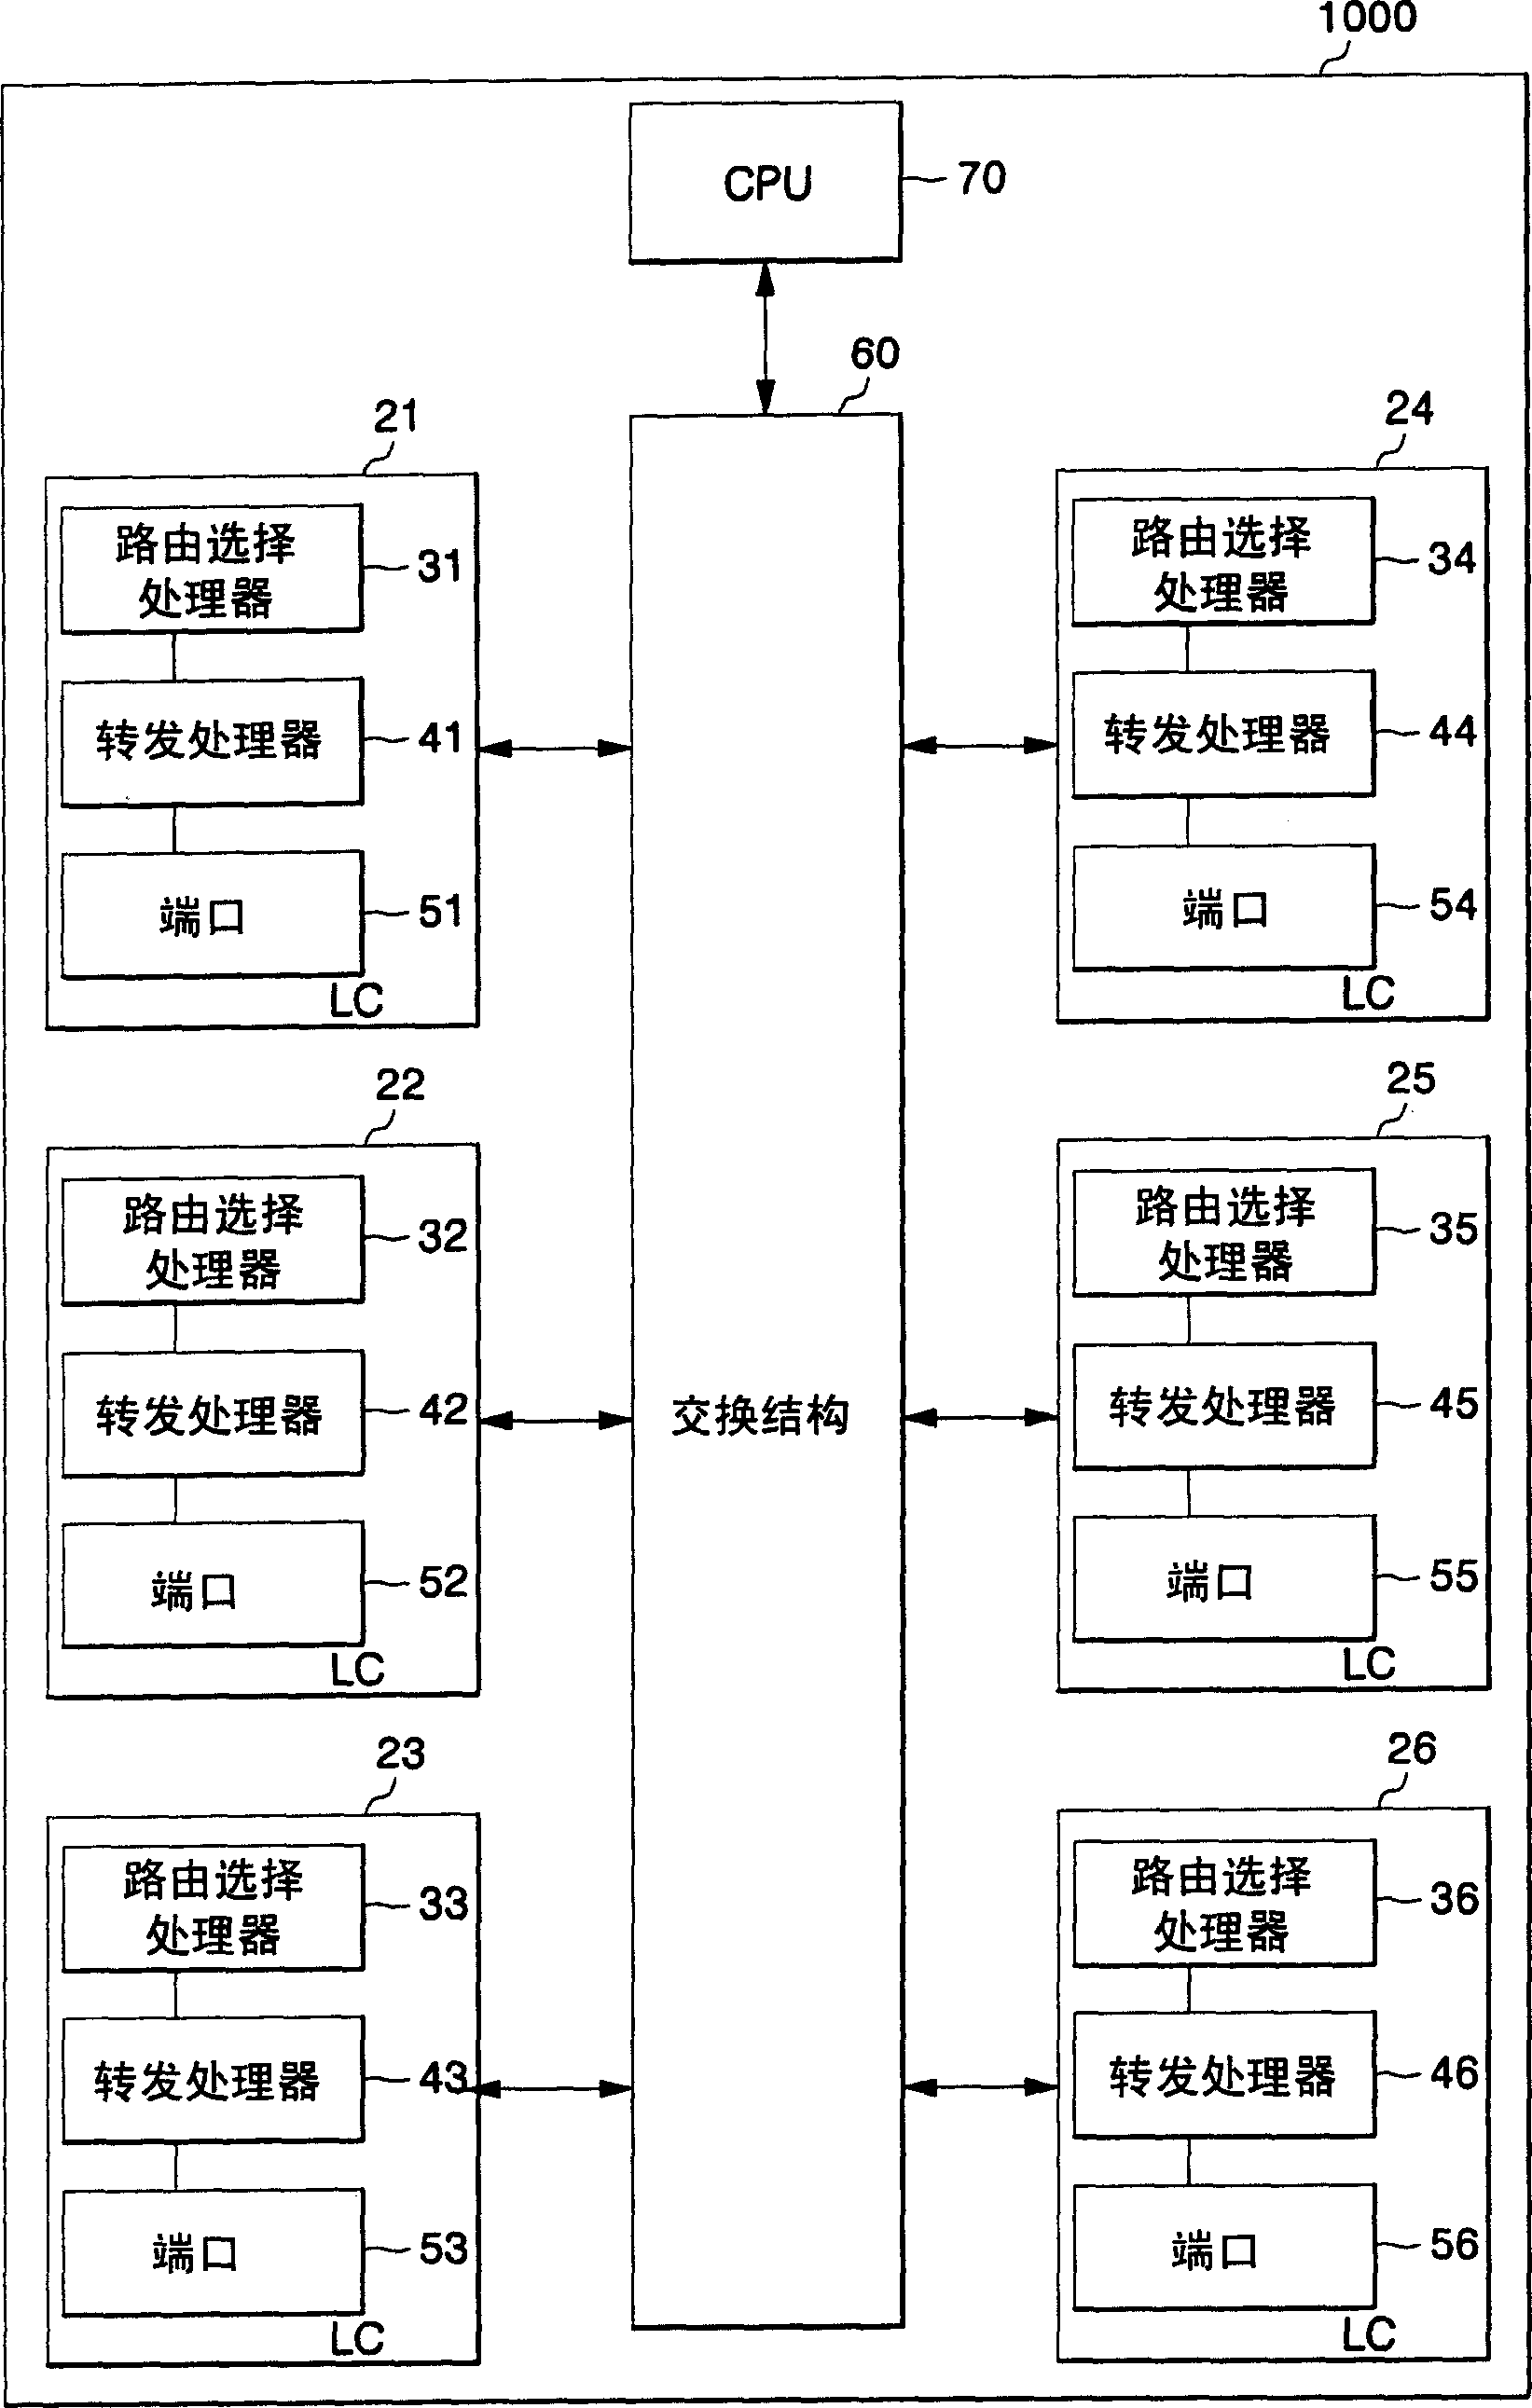 Distributed router